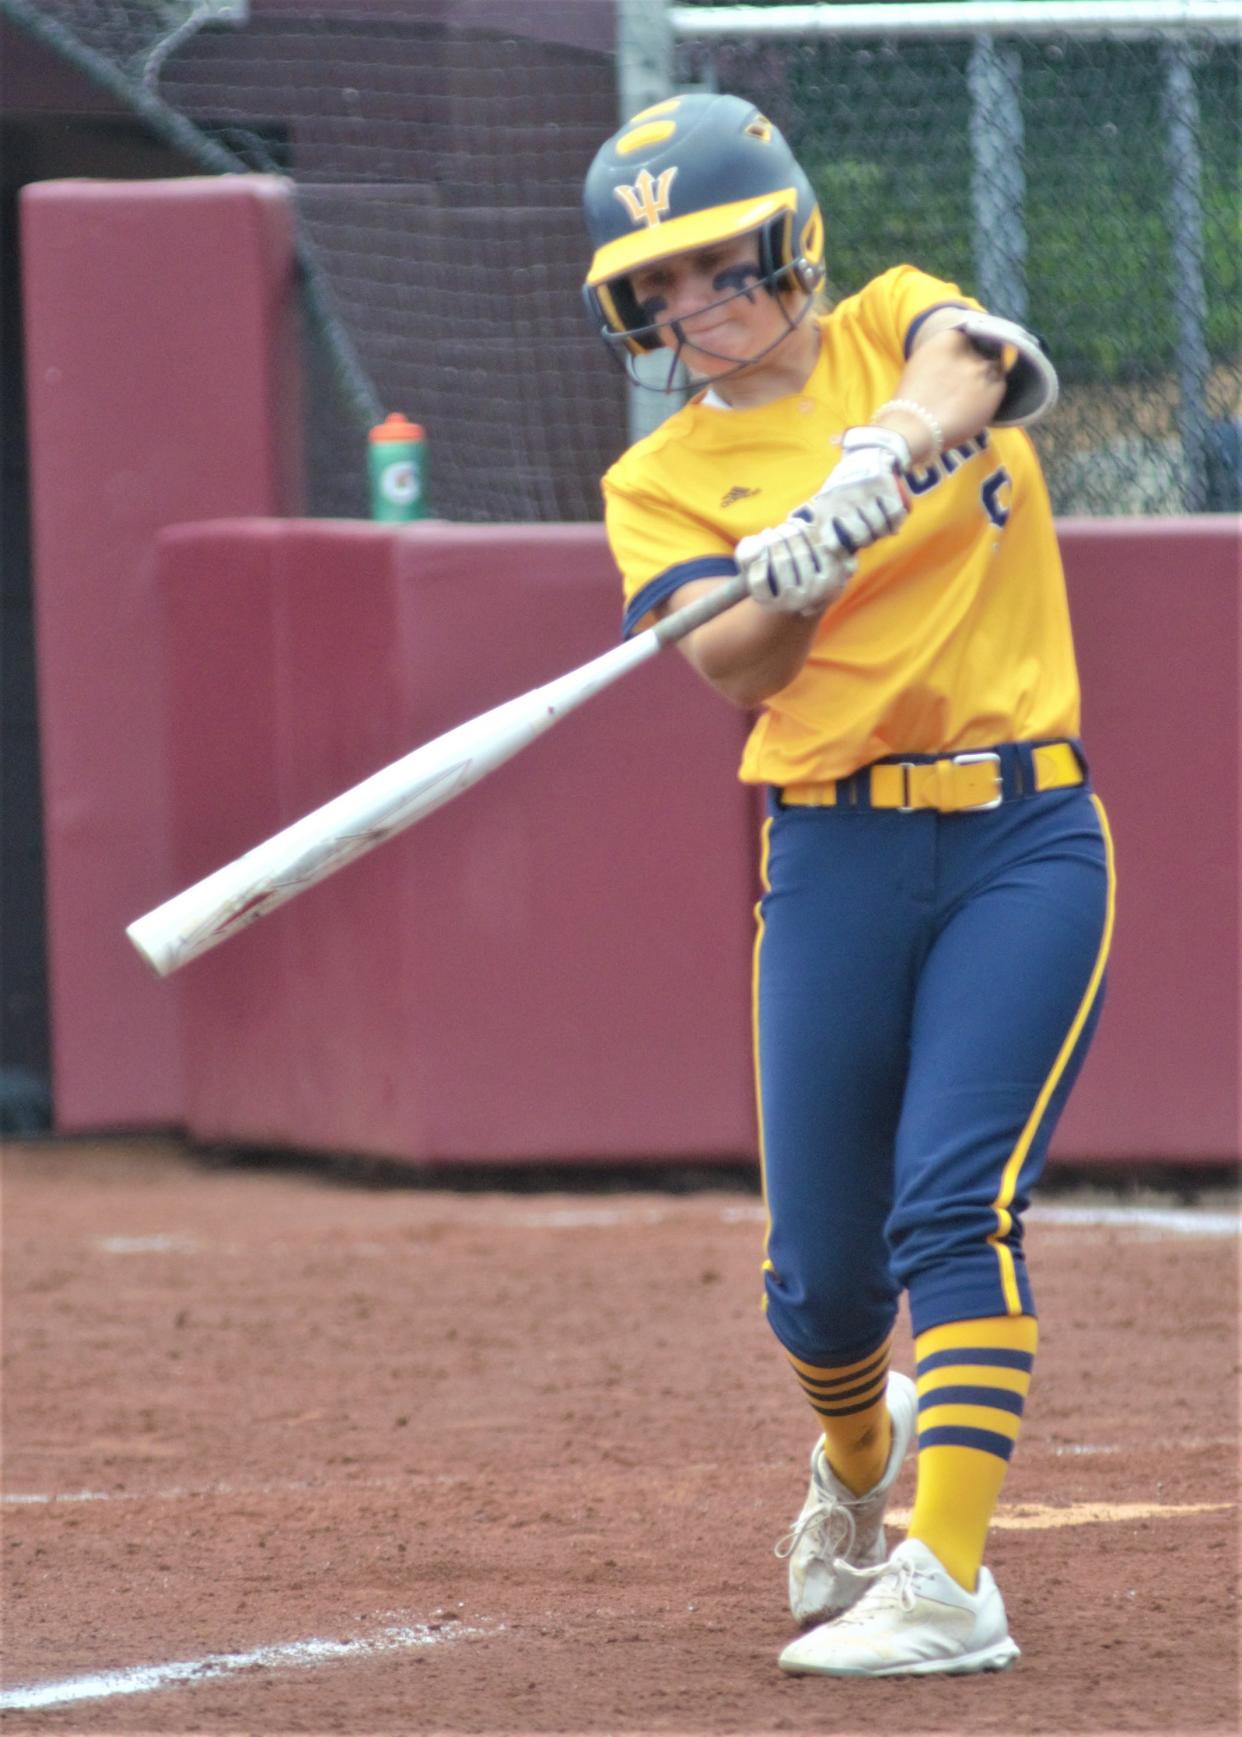 Alexis Shepherd practices her swing during an MHSAA Division 2 softball state quarterfinal matchup between Gaylord and Hudsonville Unity Christian on Tuesday, June 13 at Margo Jonker Stadium on the campus of Central Michigan University, Mount Pleasant, Mich.